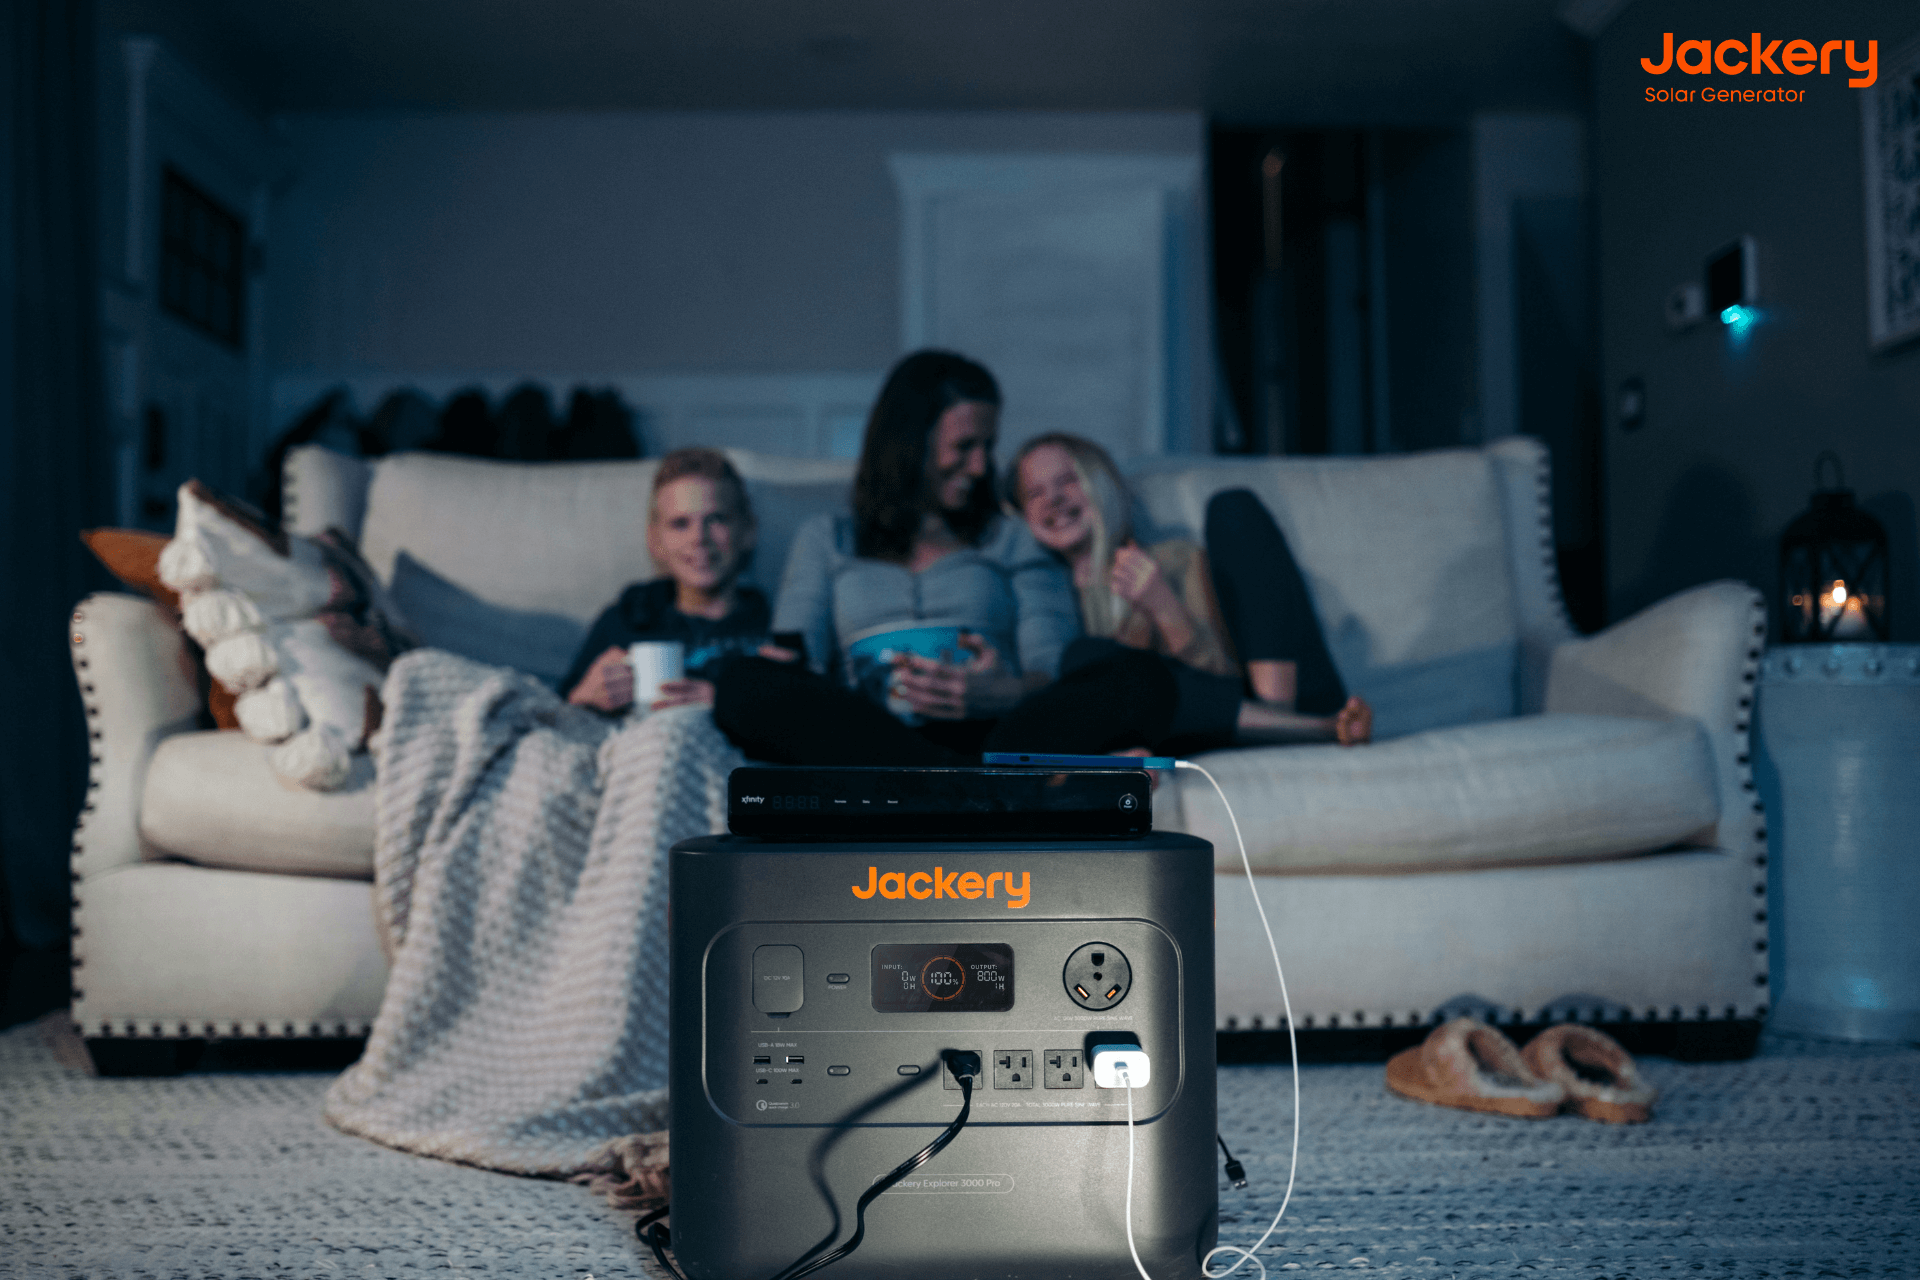 jackery explorer power stations as an emergency home backup